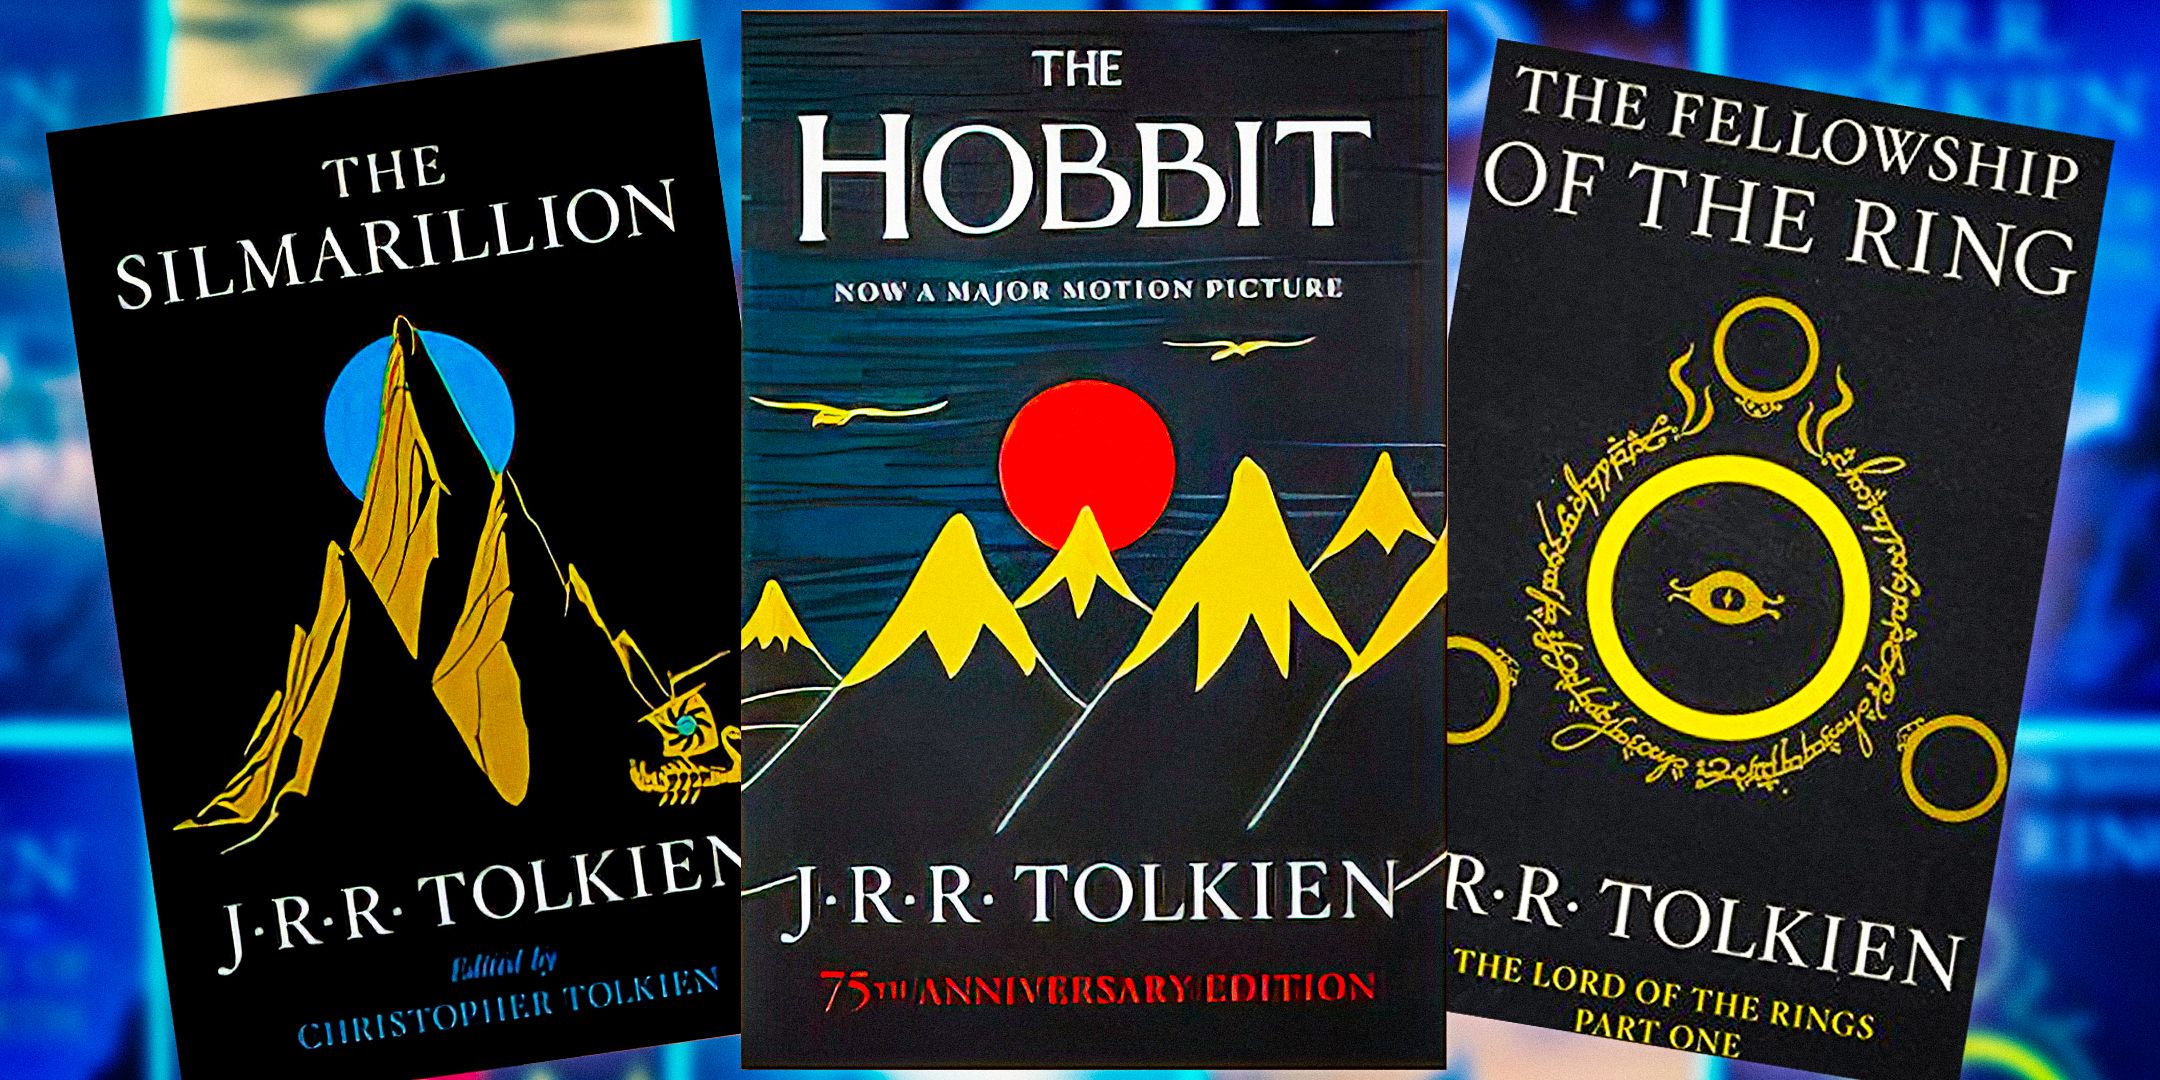 J.R.R  Tolkien book covers including The Silmarillion, The Hobbit, and The Fellowship of the RIng